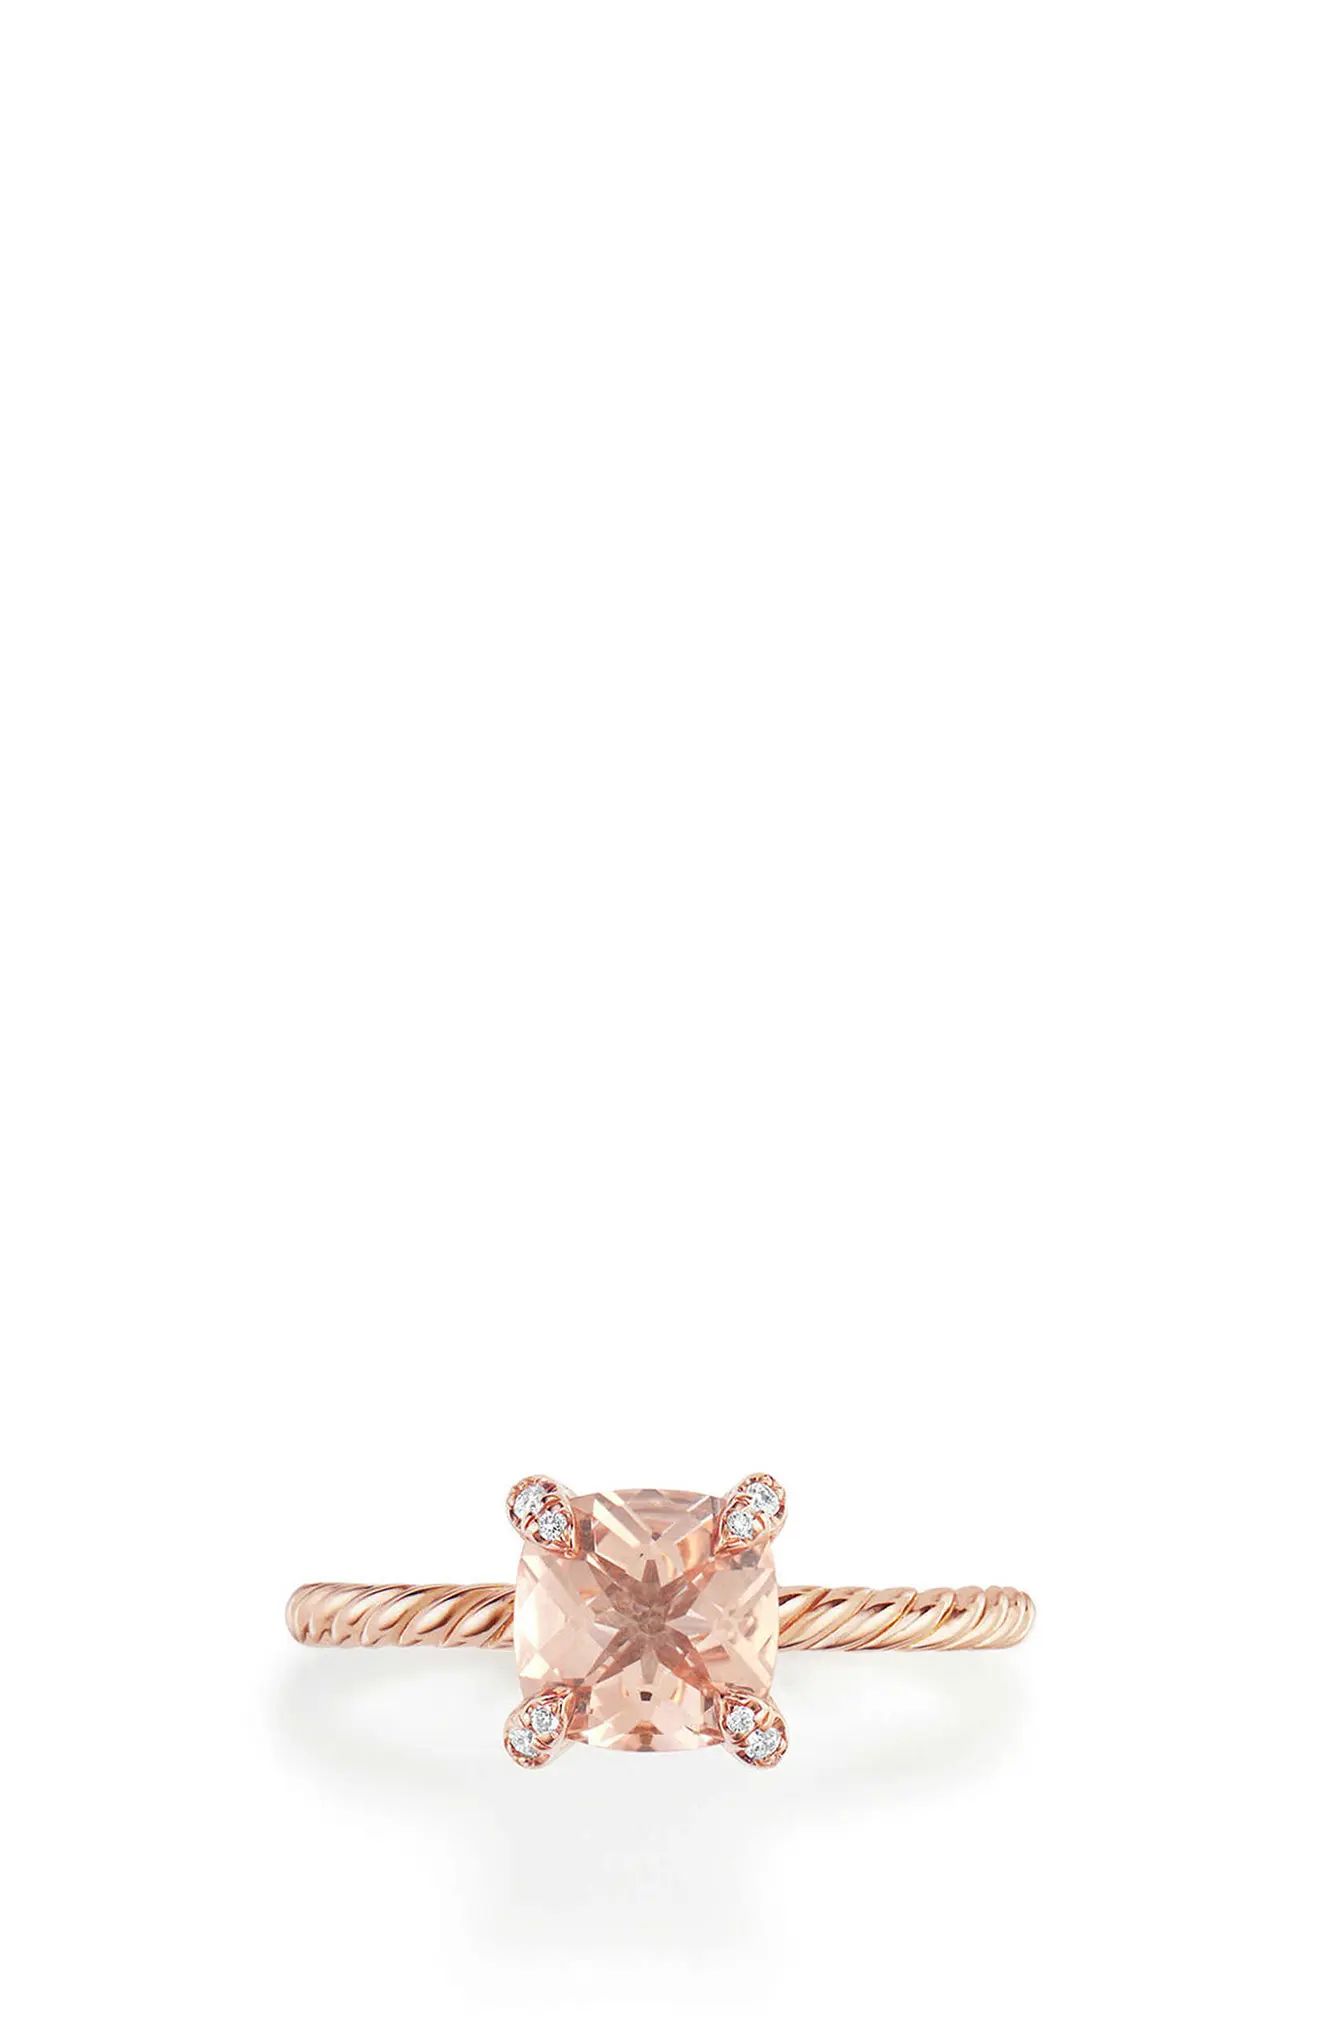 David Yurman Chatelaine Ring with Morganite and Diamonds in 18K Rose Gold | Nordstrom